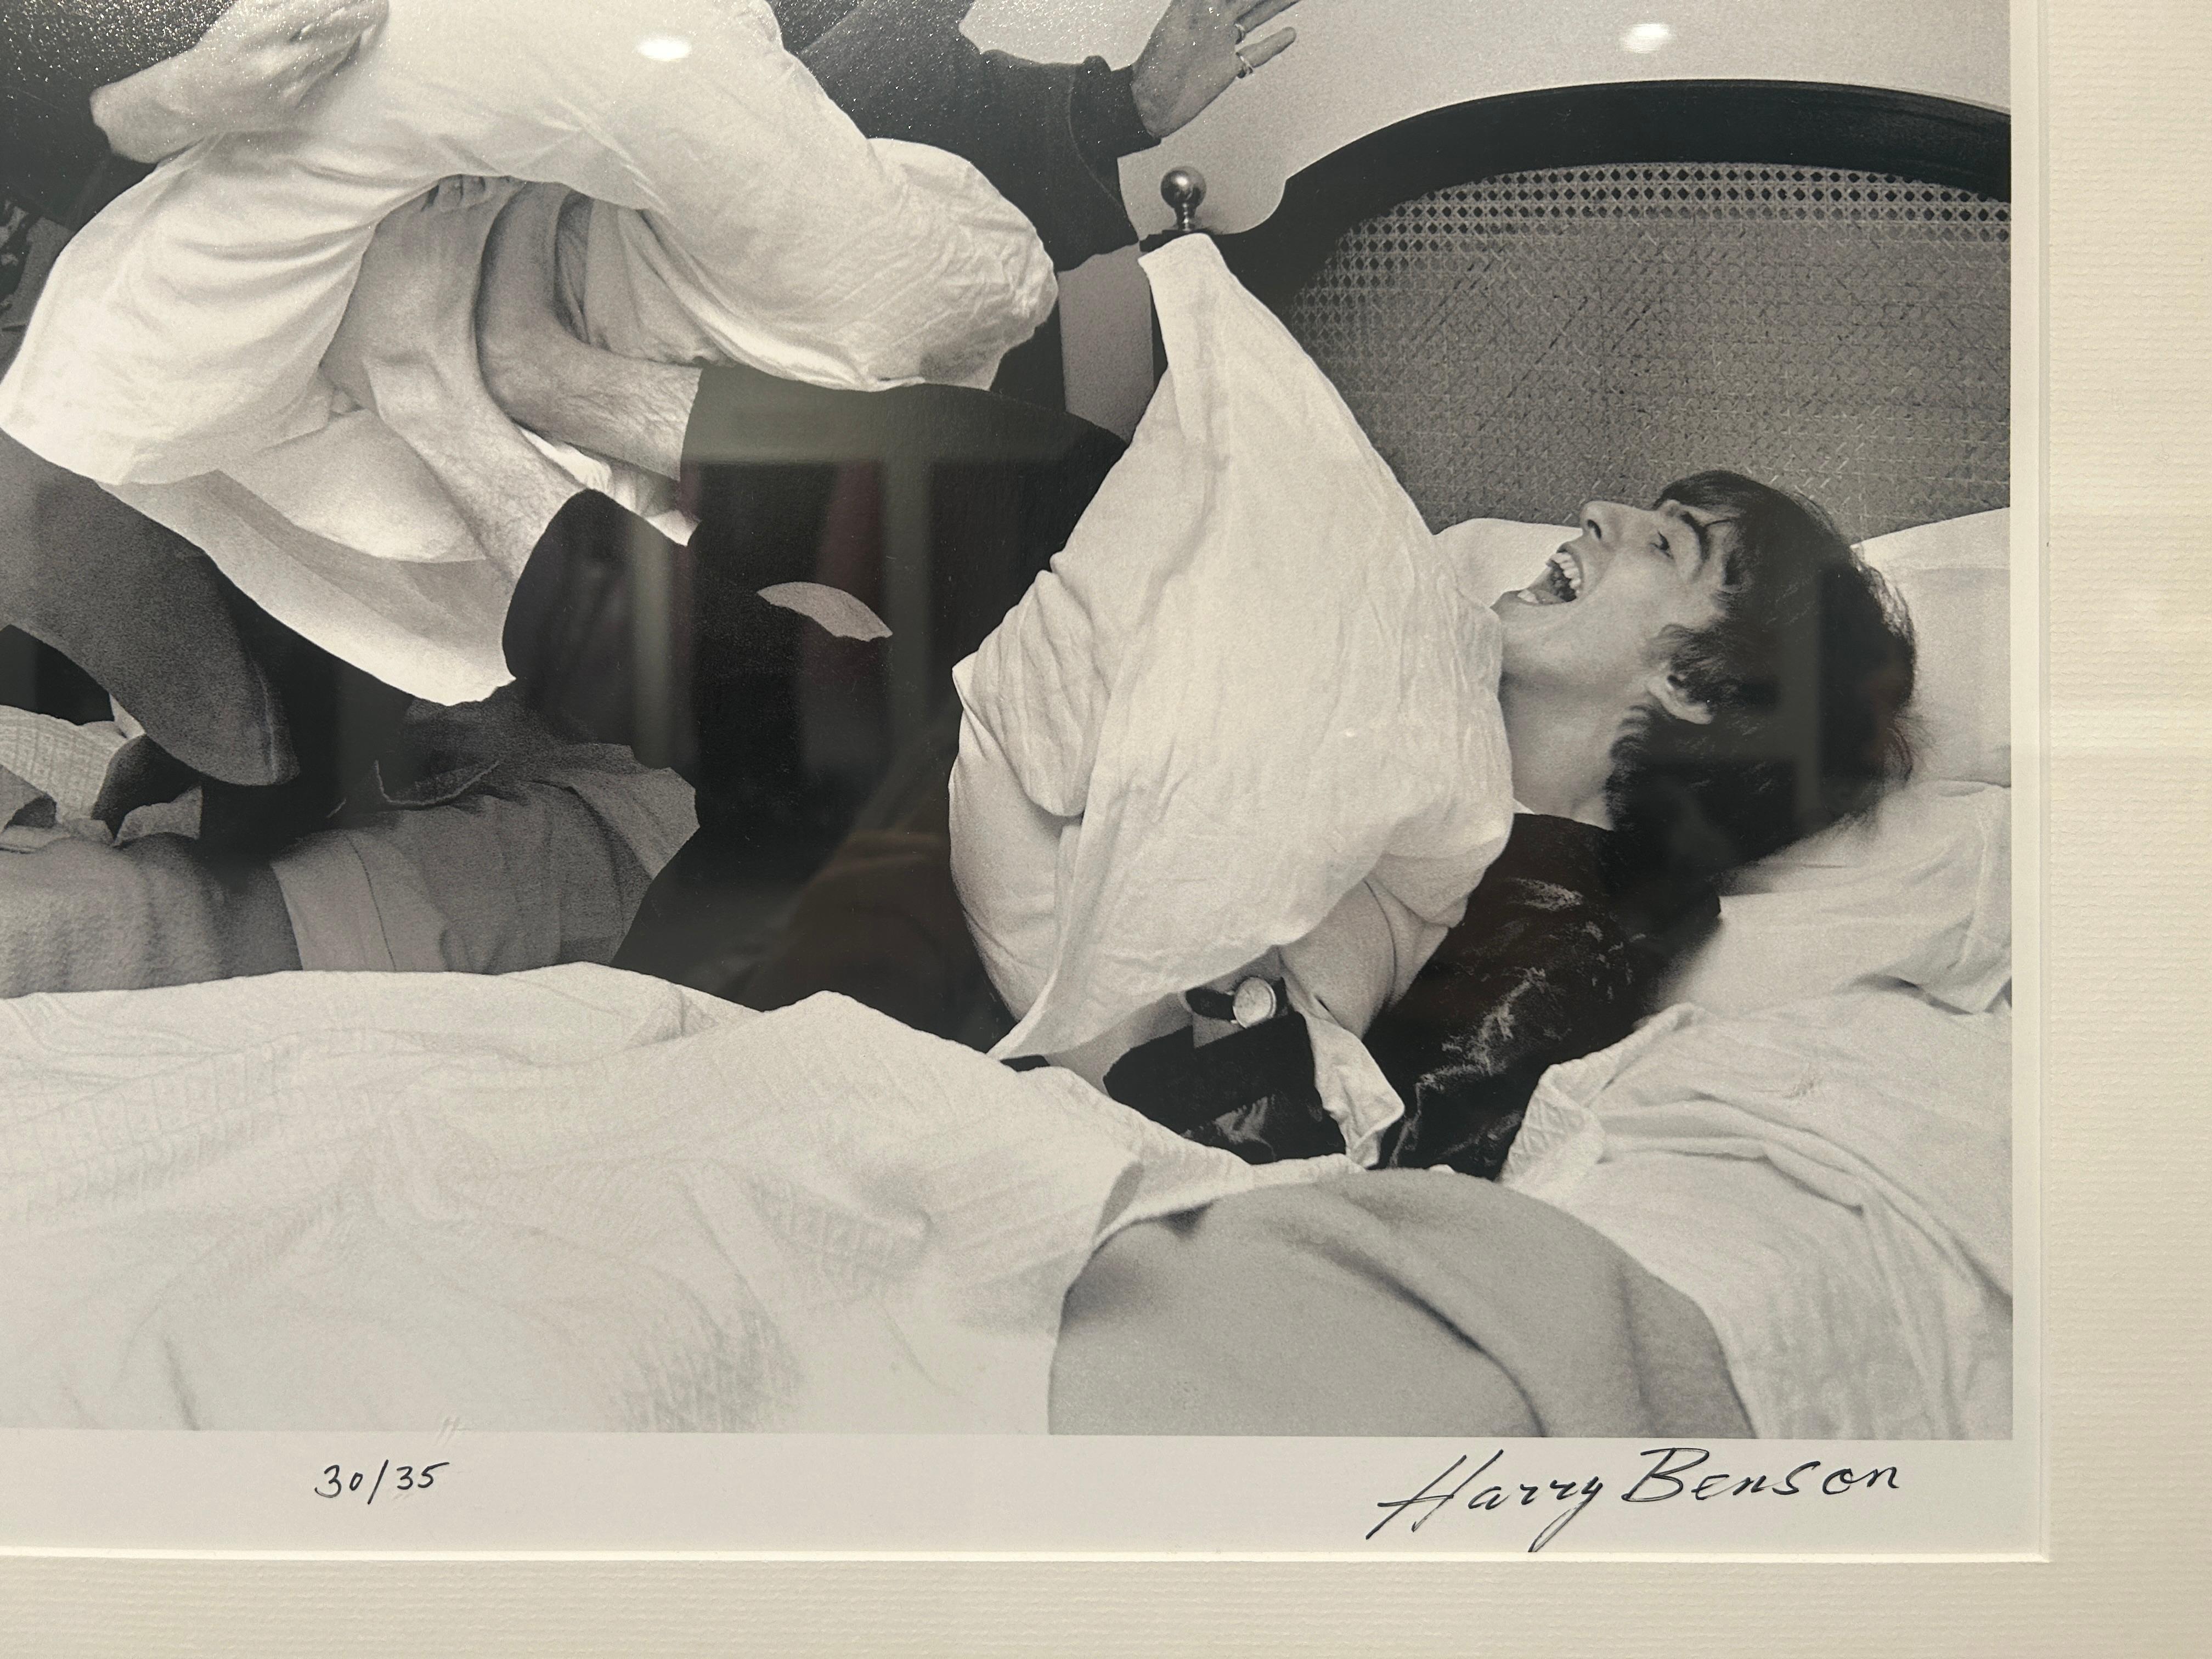 The Pillow Fight - Photograph by Harry Benson